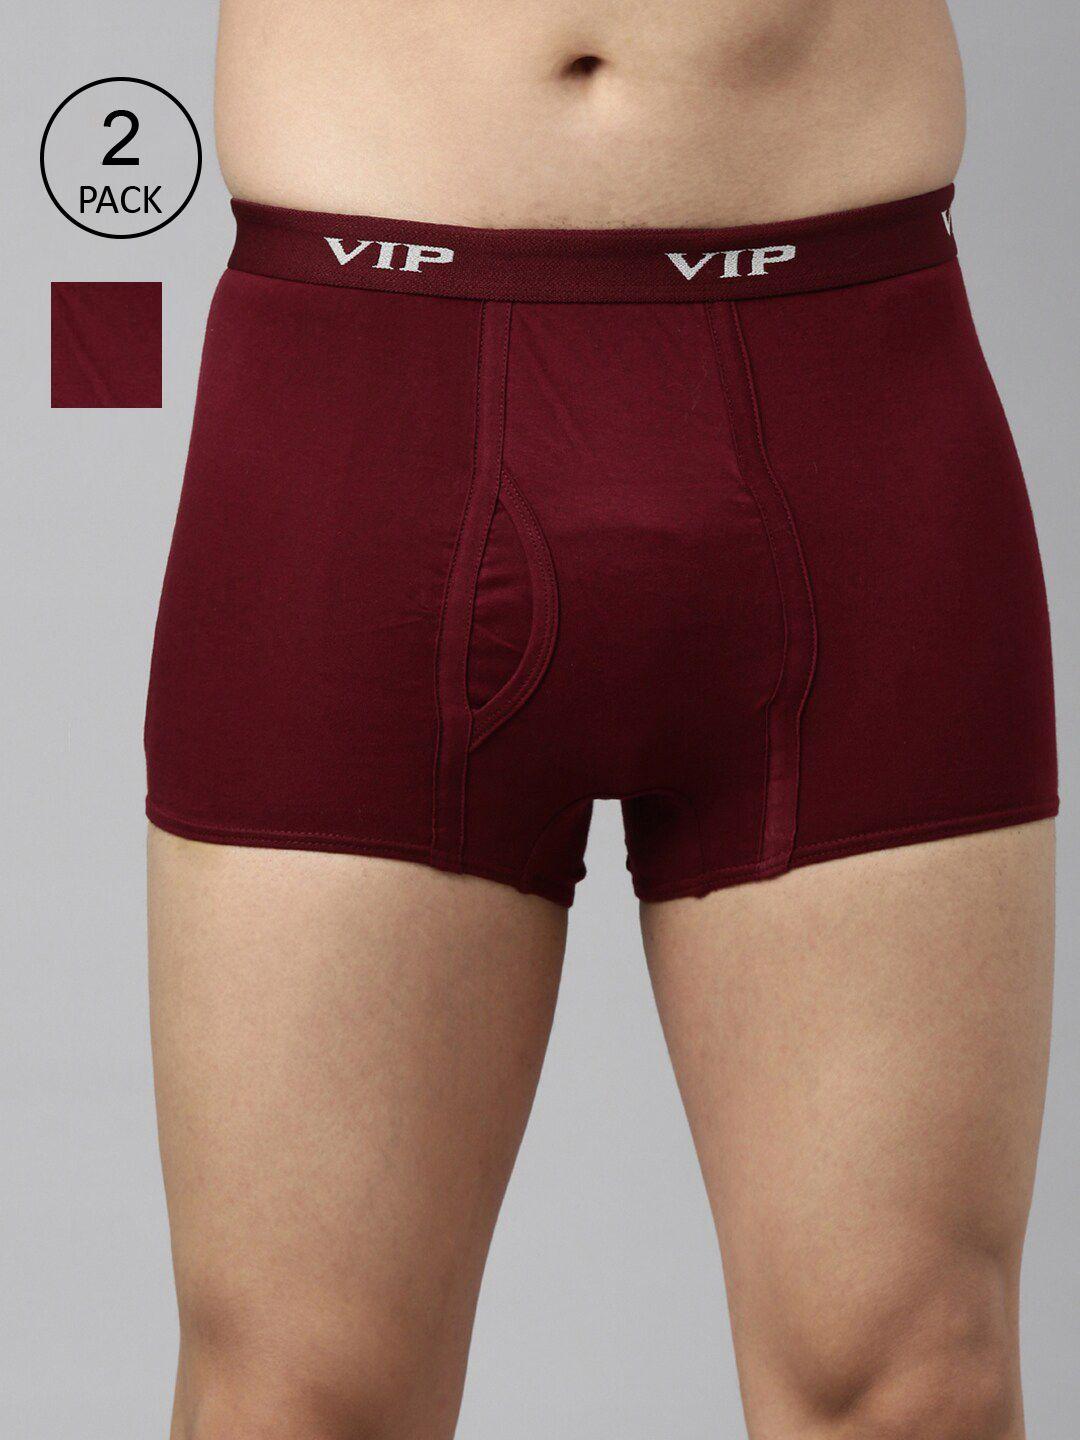 vip men pack of 2 assorted pure cotton trunks punchp_80